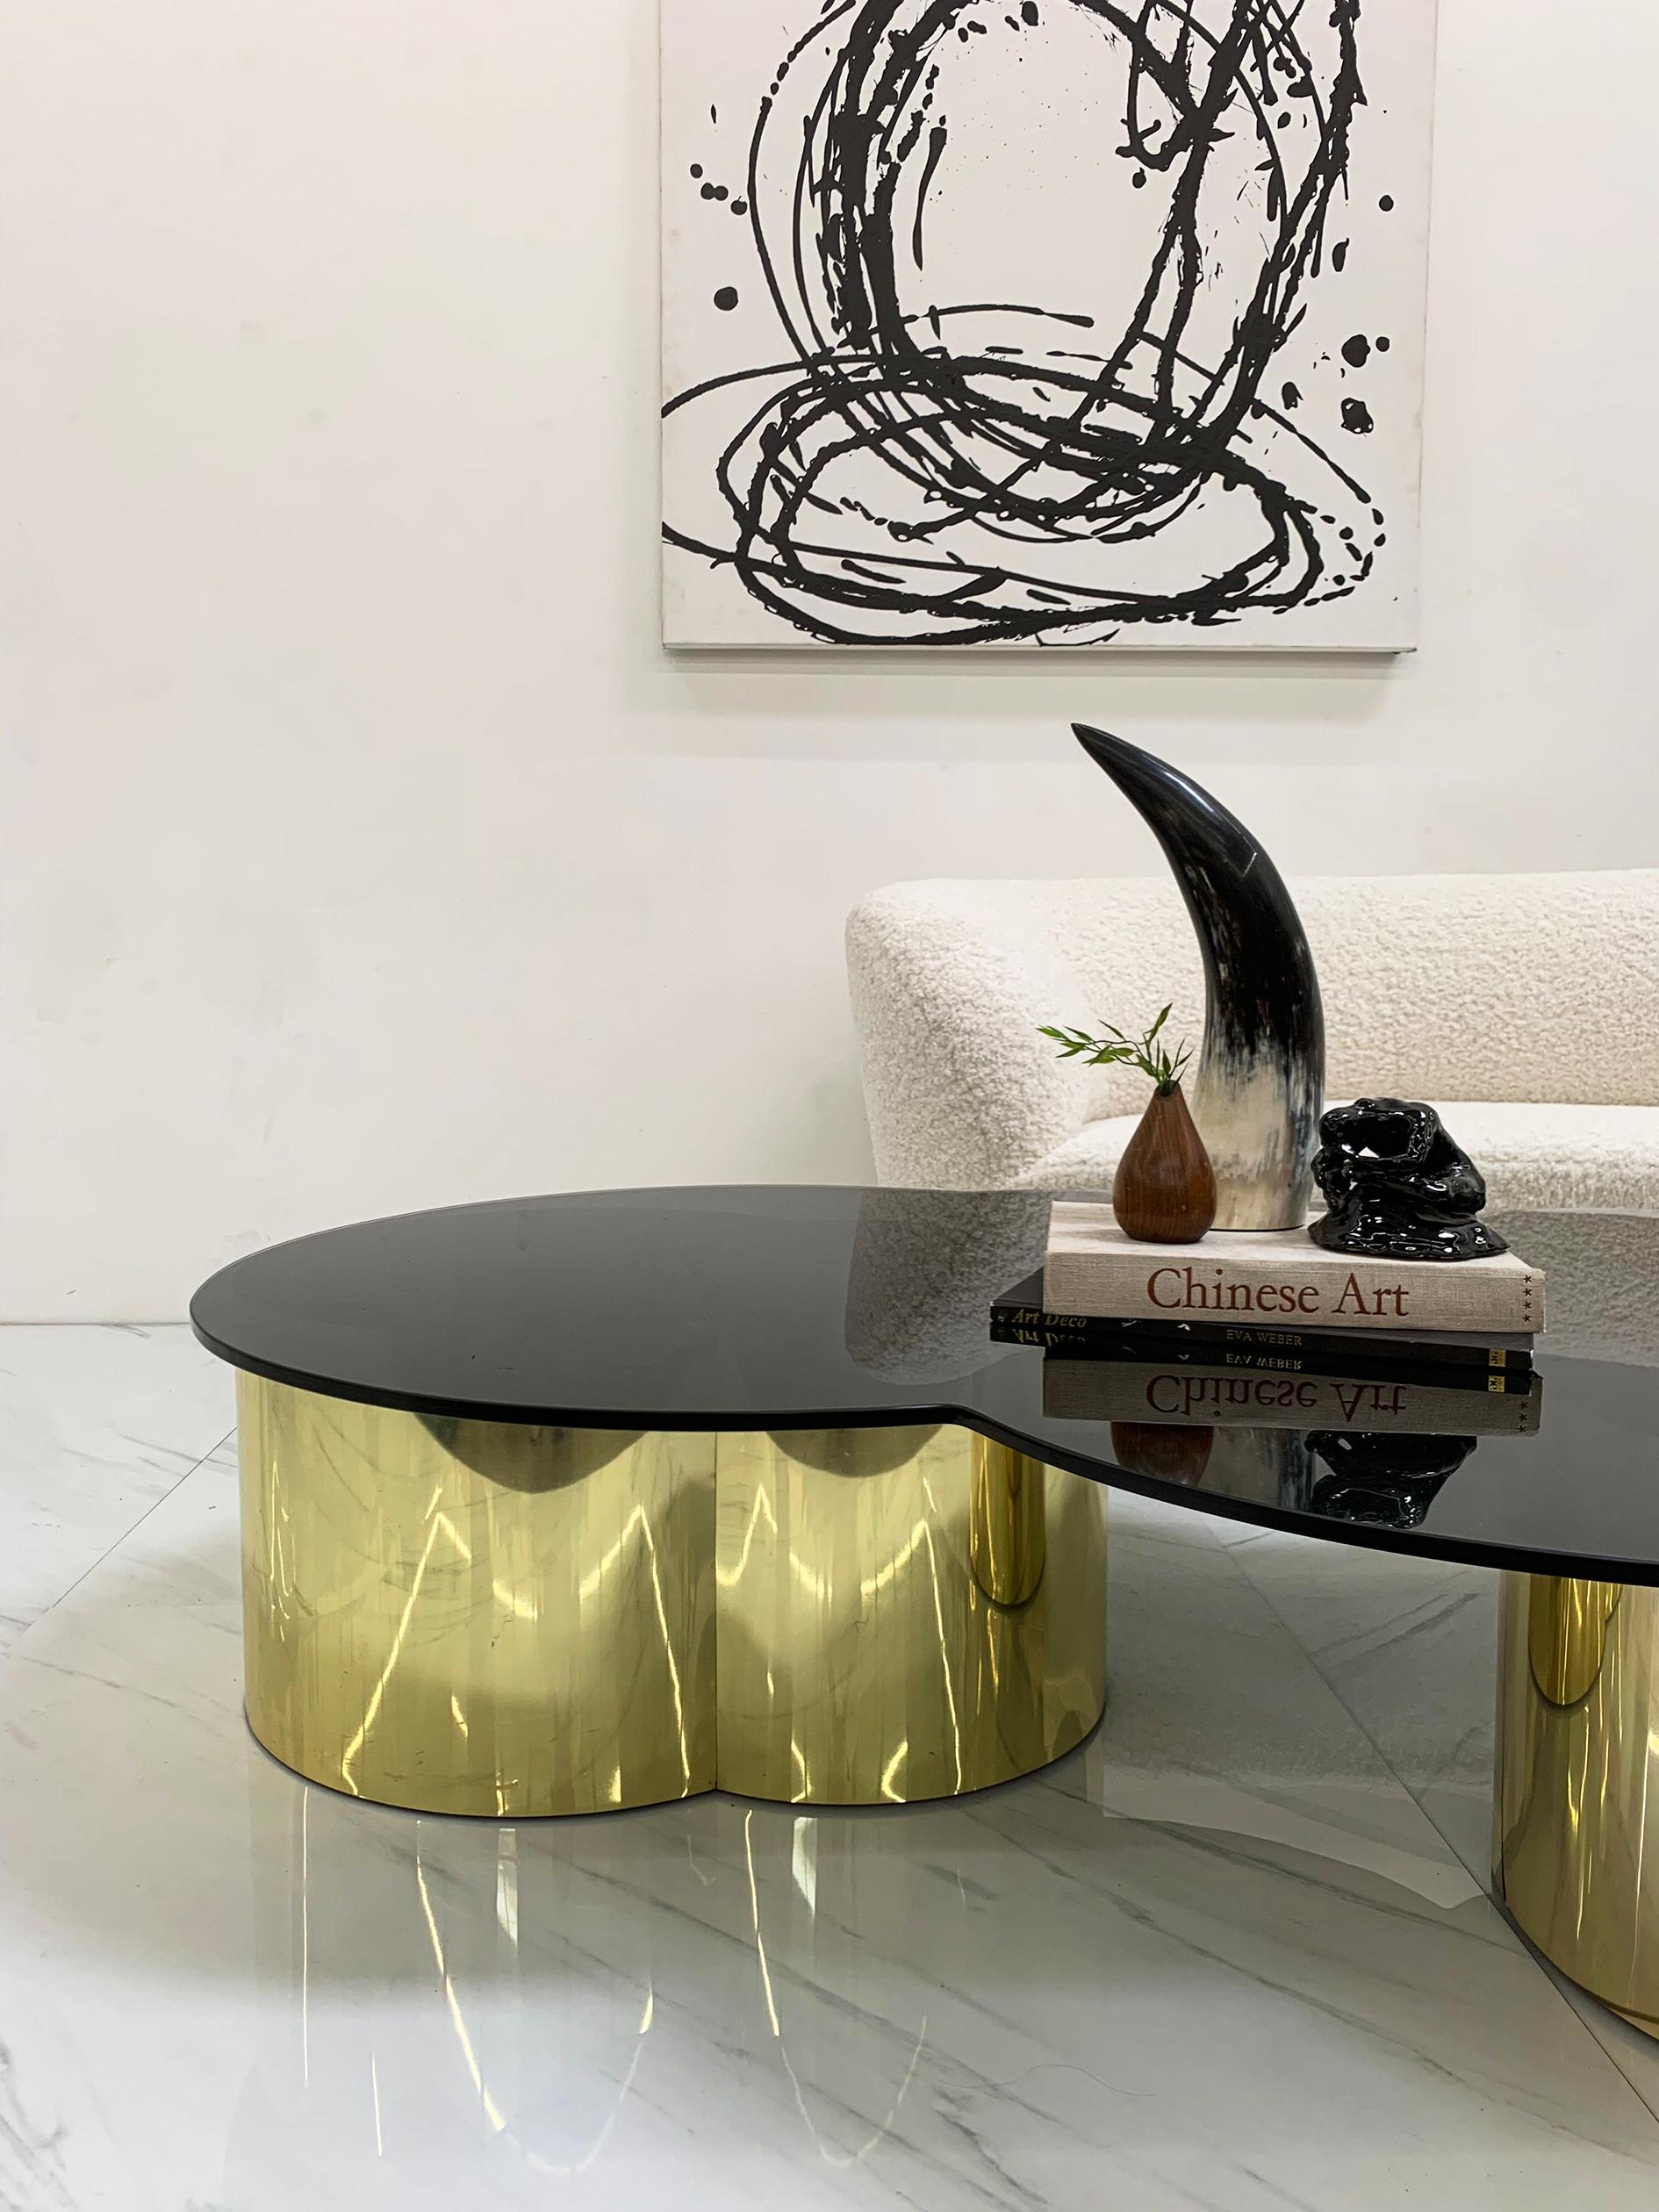 This coffee table is absolutely gorgeous. Consisting of two circular bases, clad in brass with a free form / biomorphic black tinted glass top, this coffee table is jaw droppingly gorgeous. 

The free form glass top floats like a cloud on top of